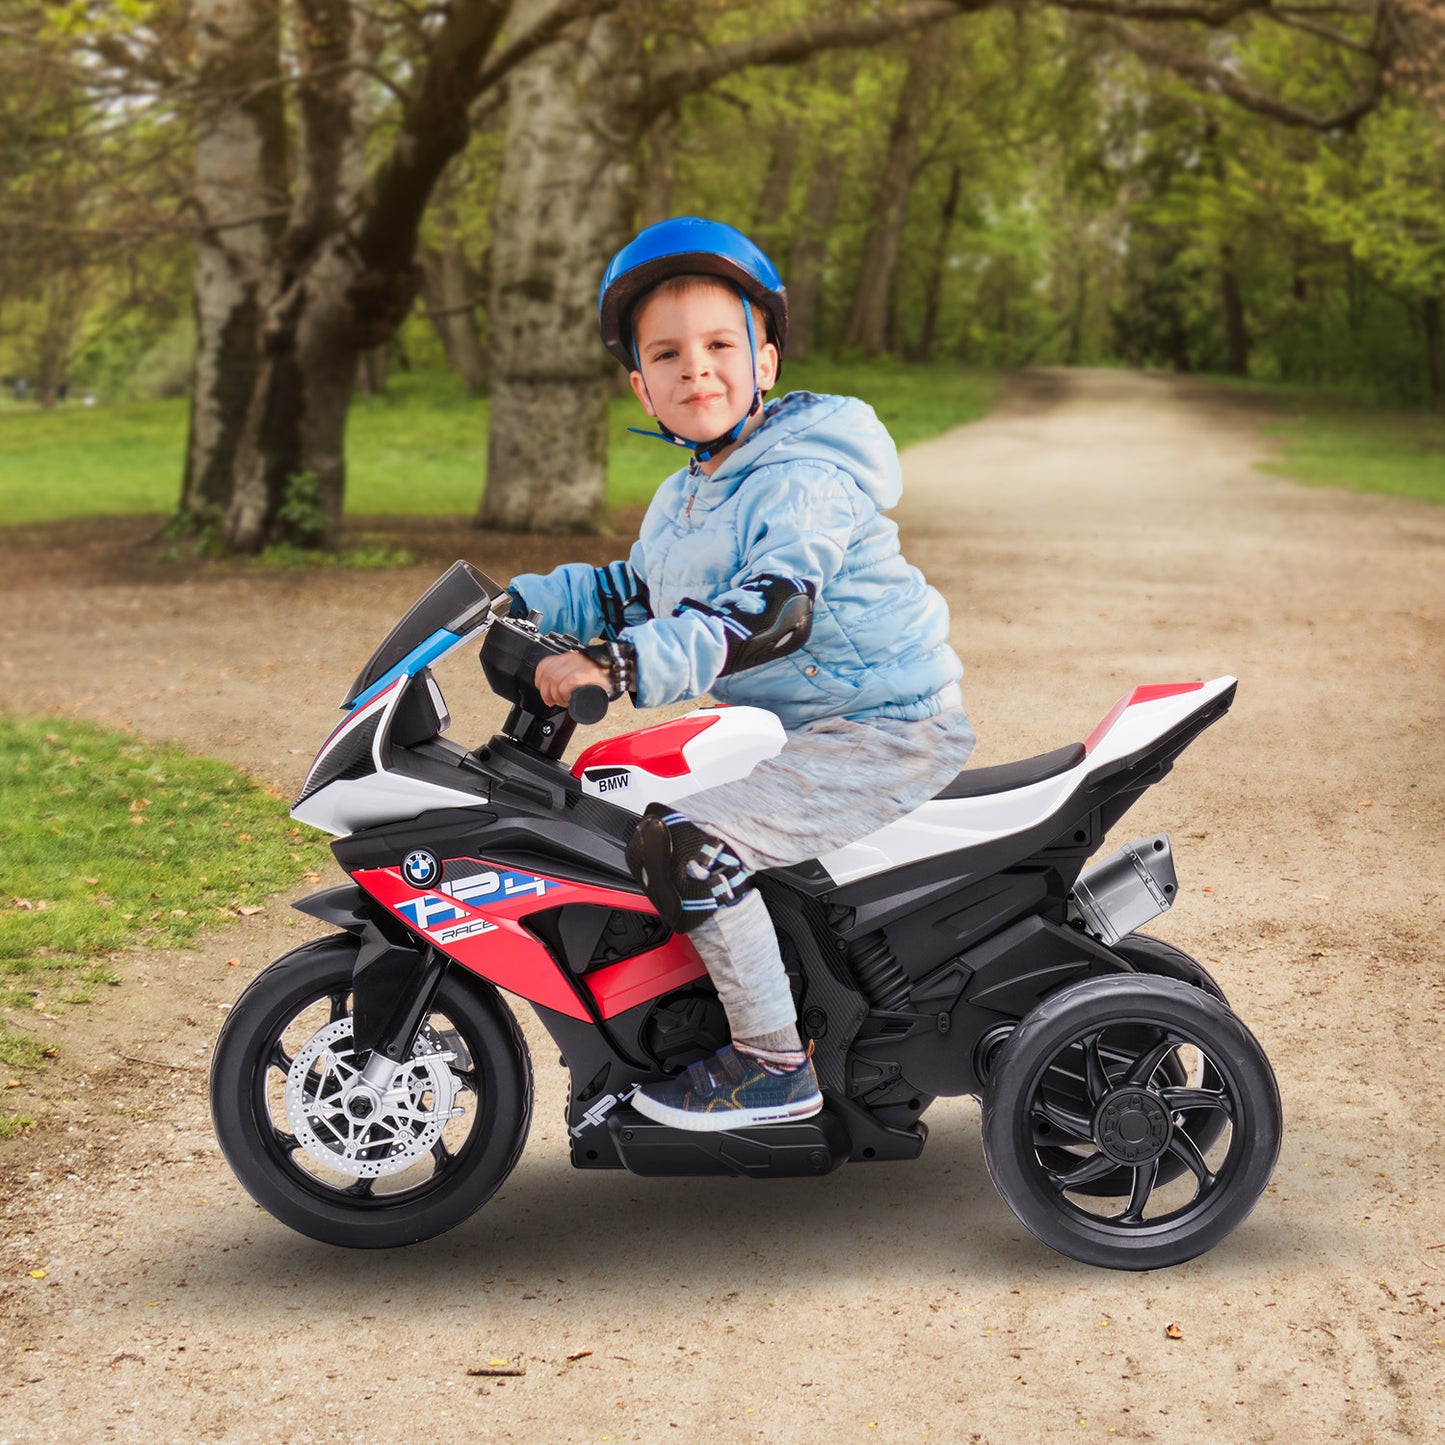 BMW HP4 Race Kids Toy Electric Ride On Motorcycle - Red